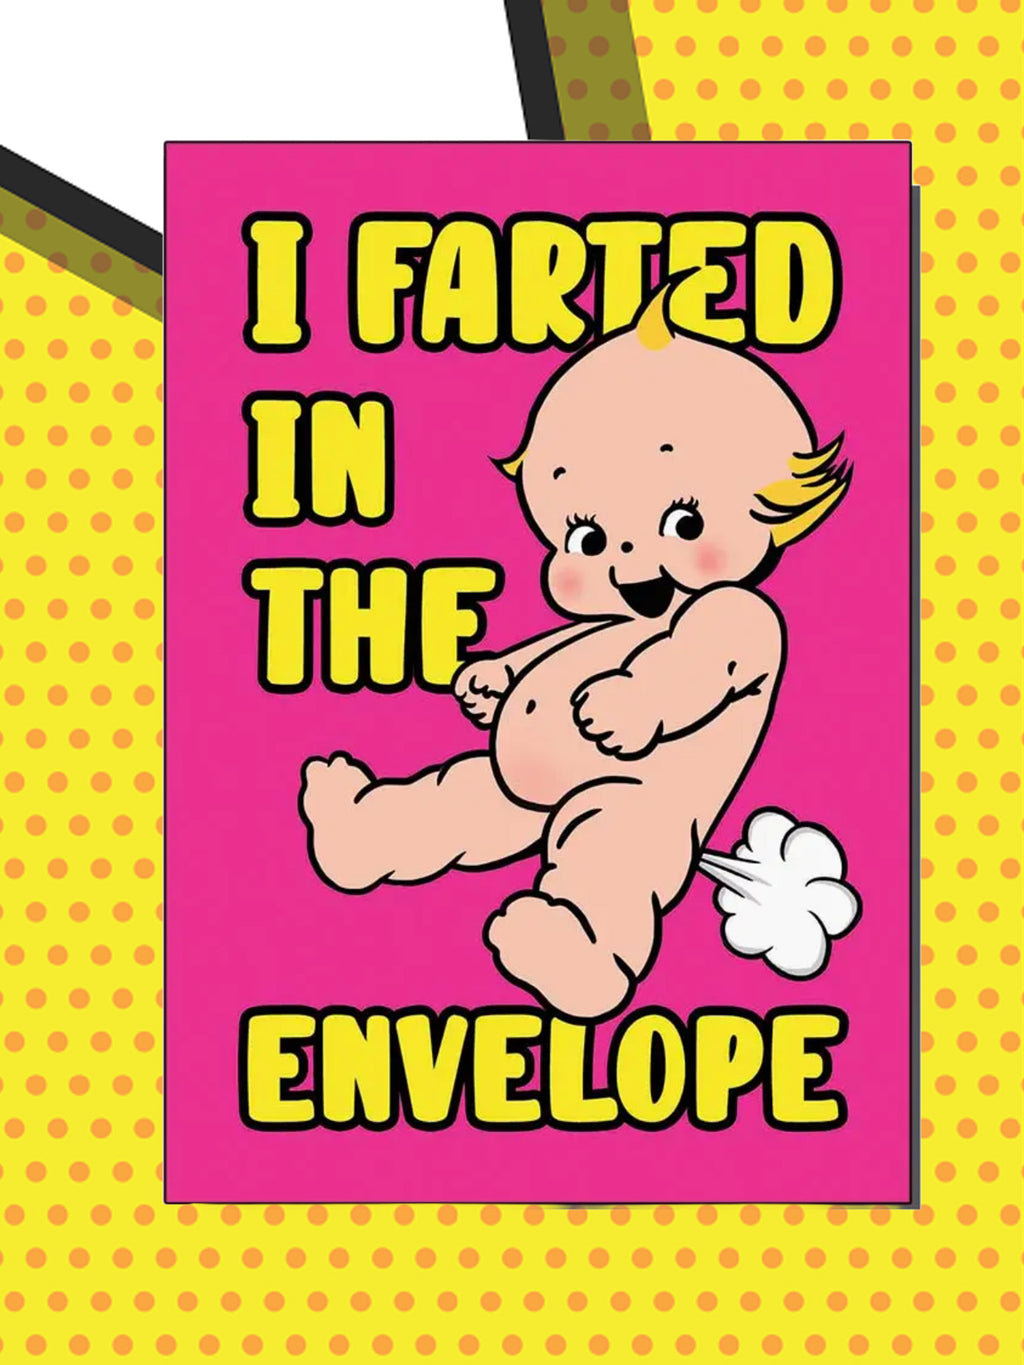 Greeting Card - I Farted In The Envelope